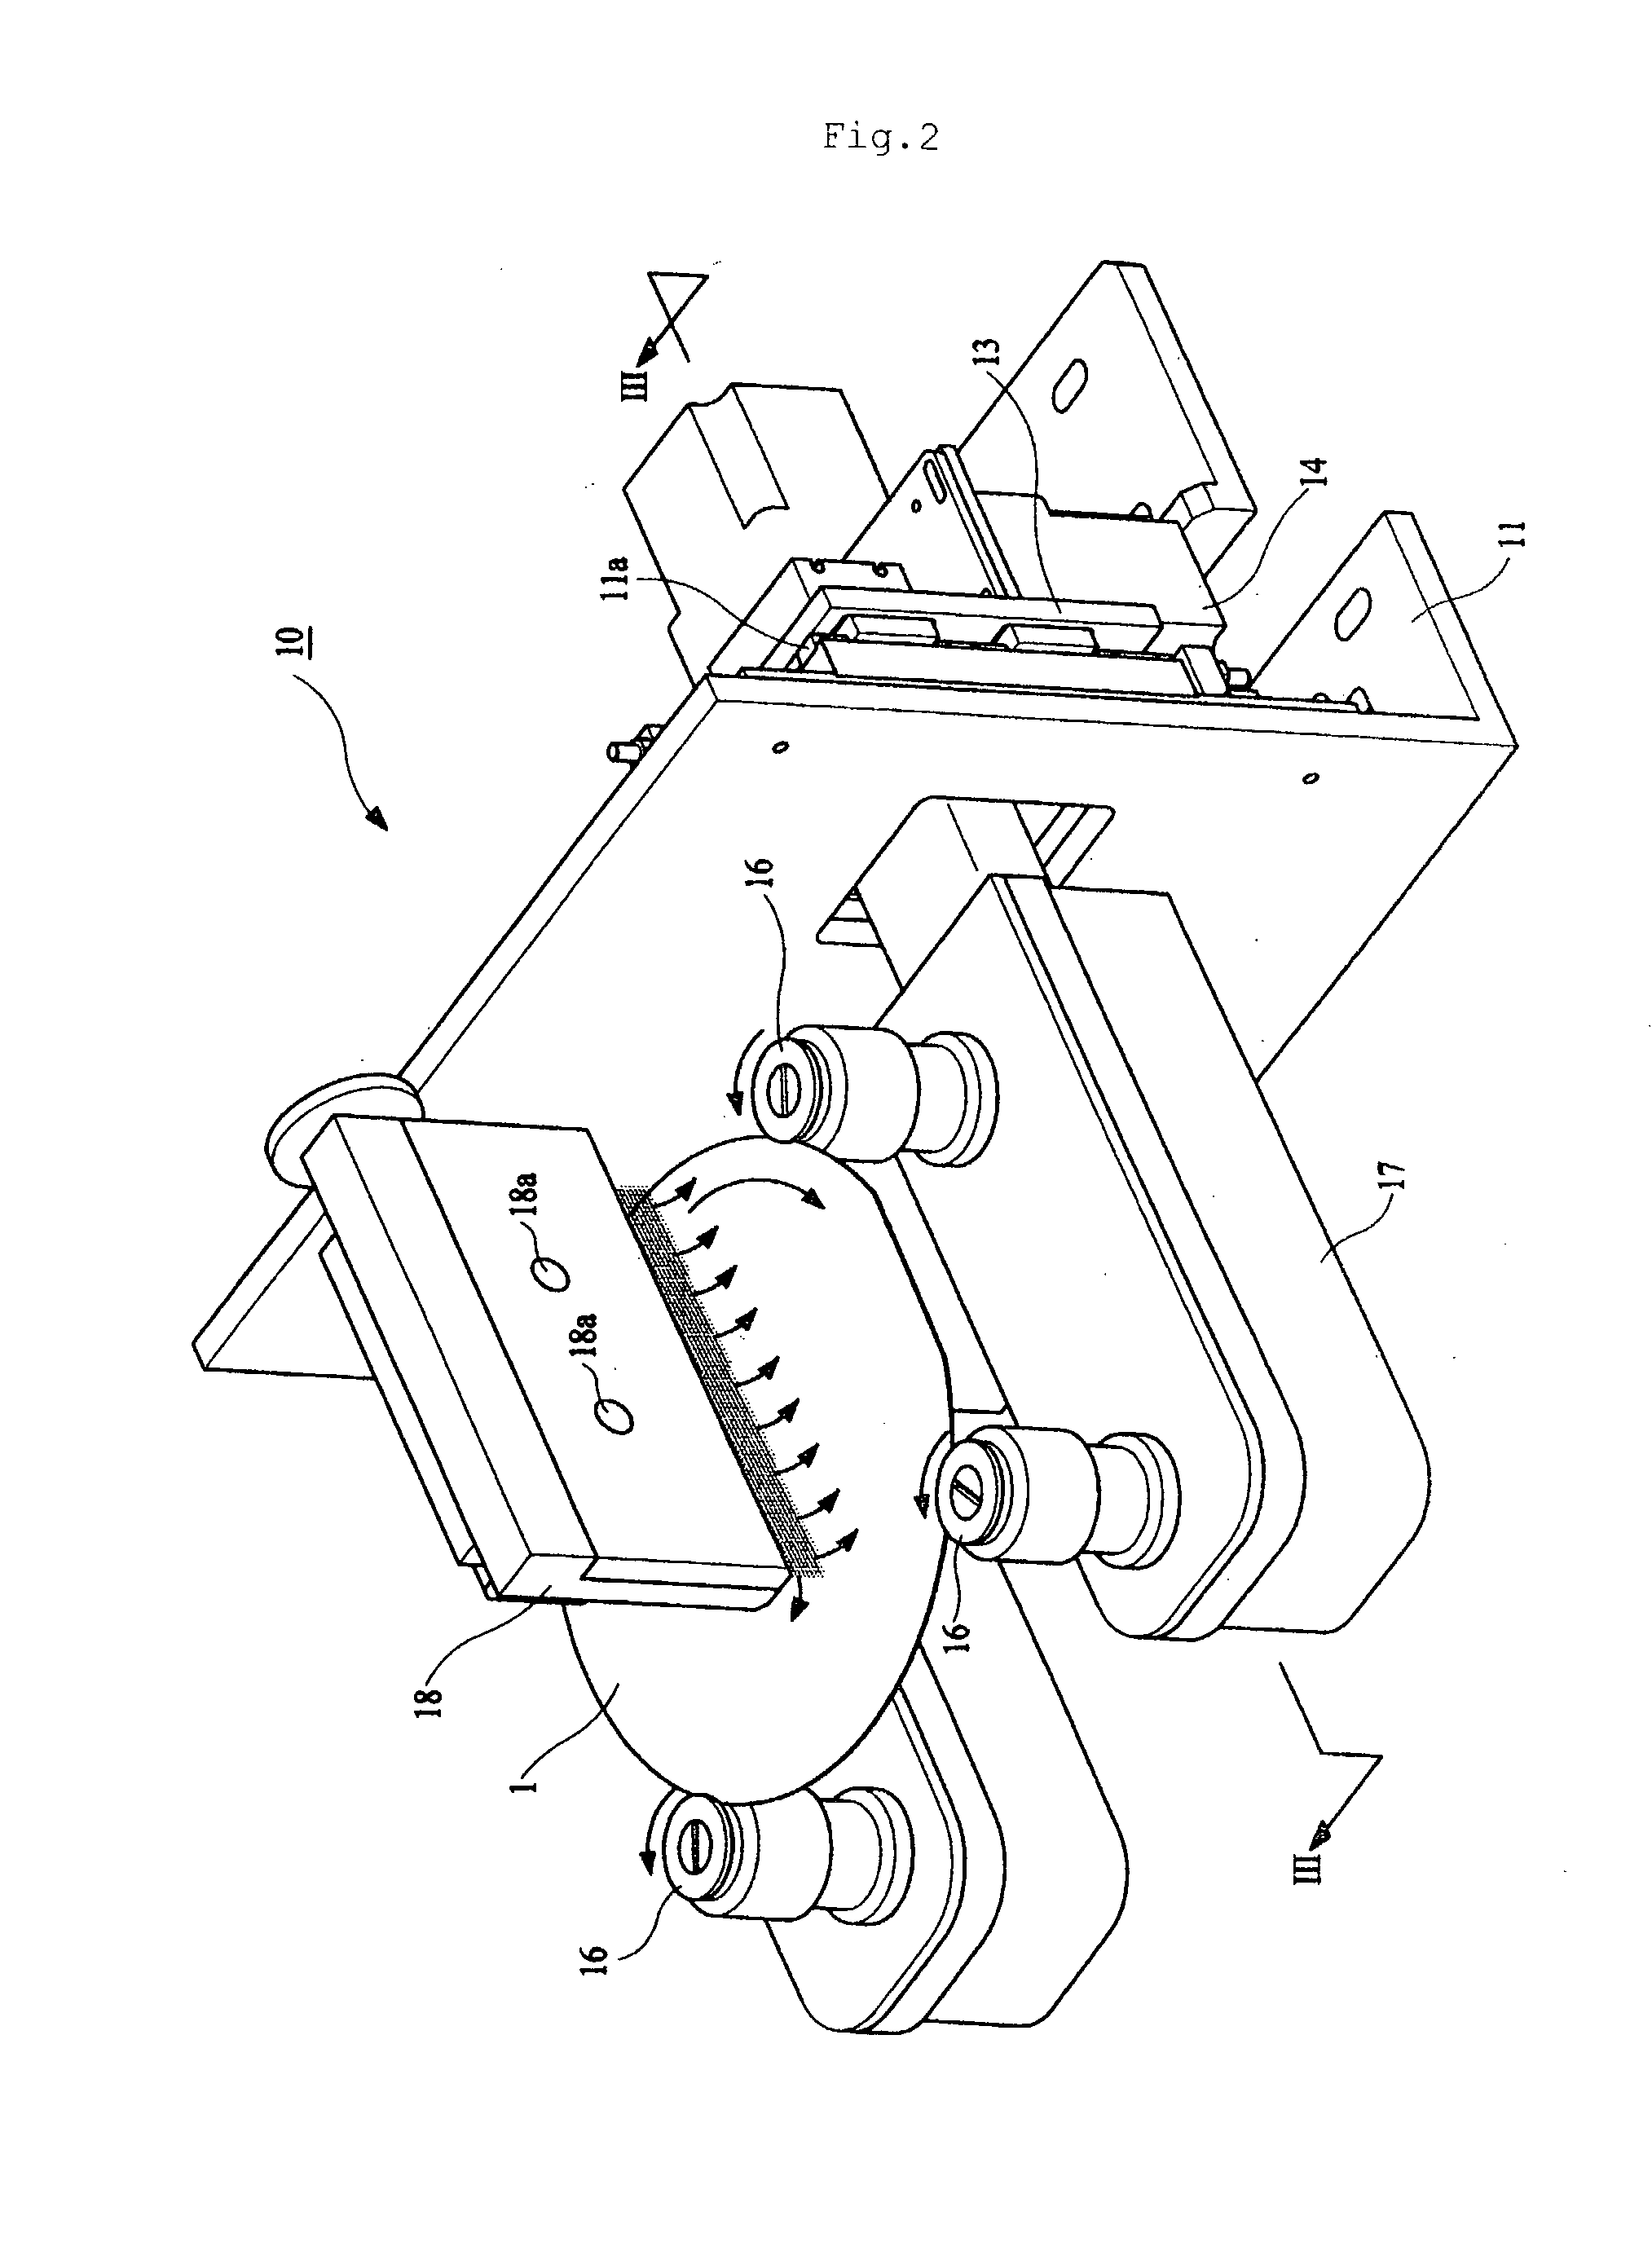 Semiconductor Wafer Cleaning System